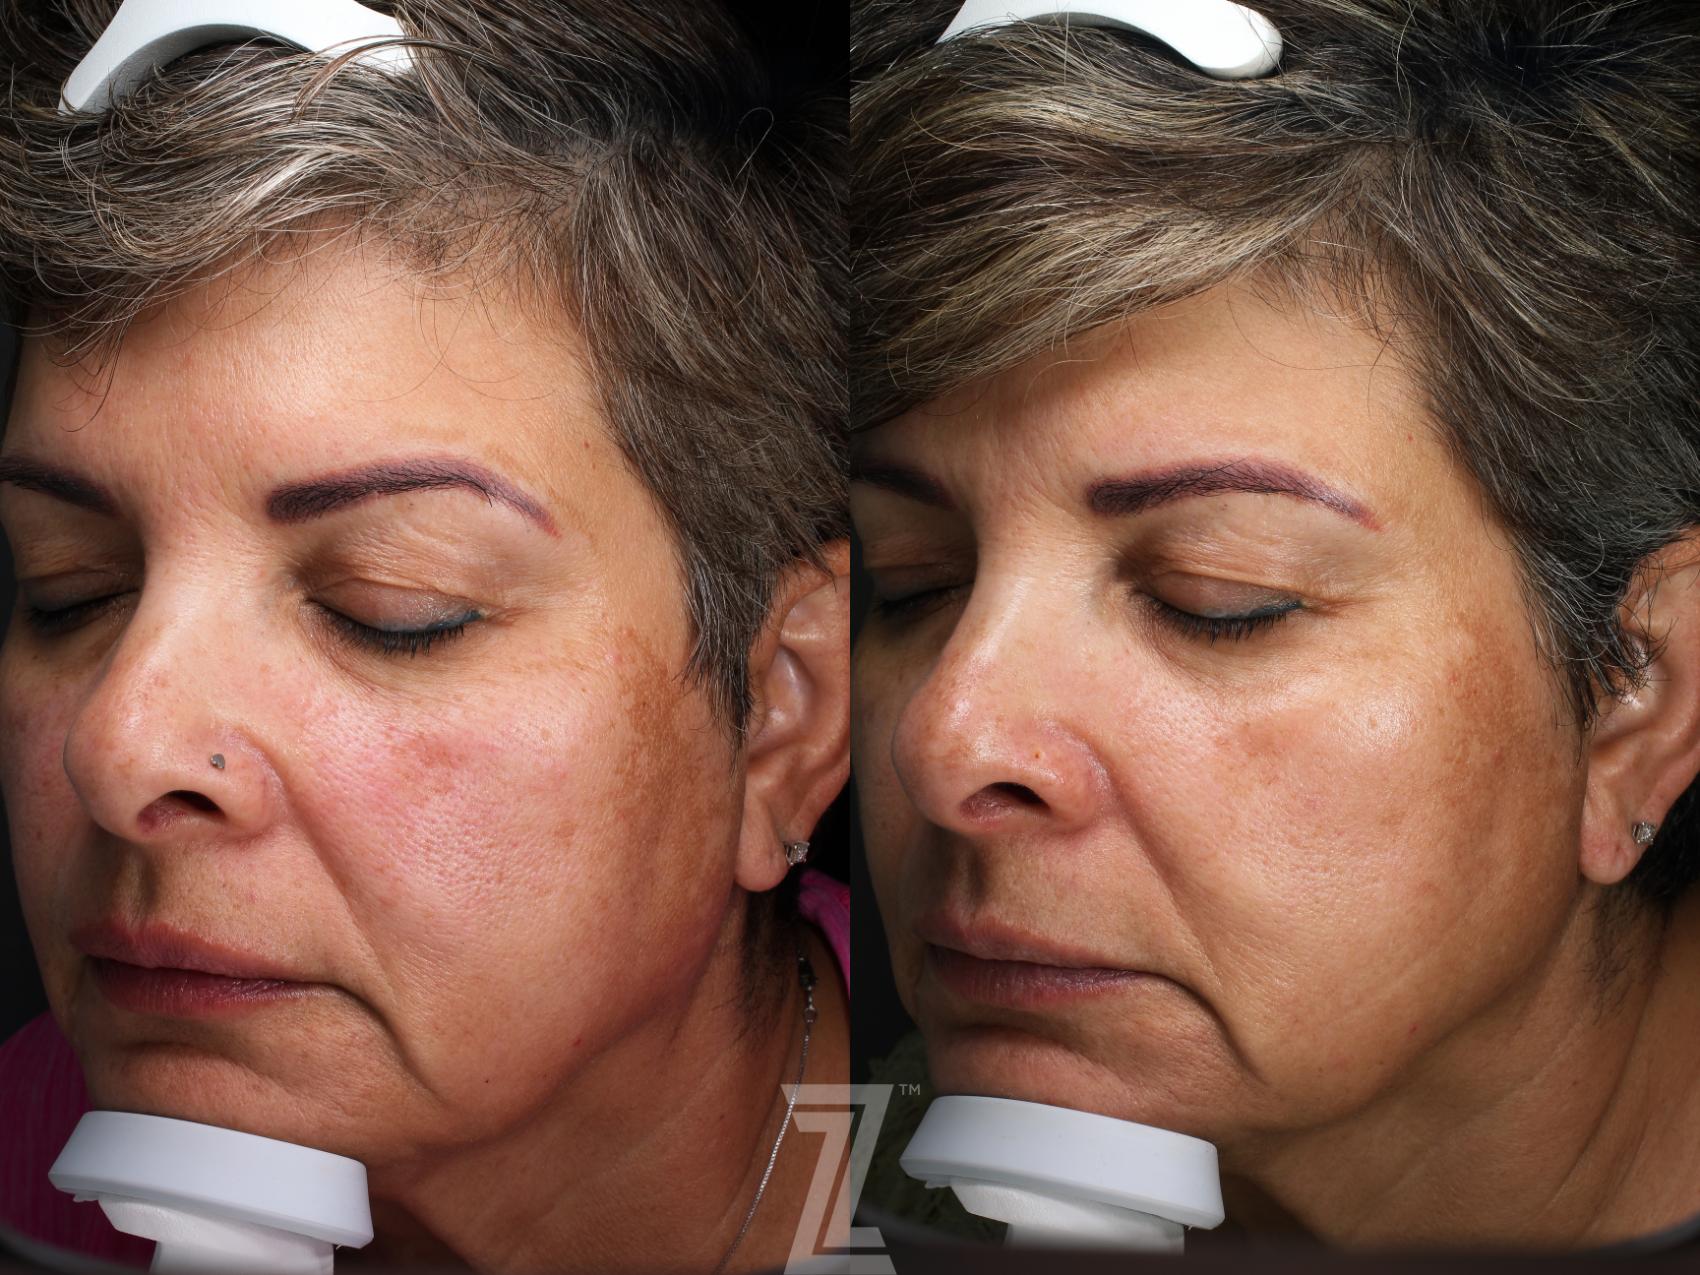 Botox, visia skin analysis, Neurotoxin, Dysport, Before and After, B&A, Tummy Tuck, Breast Aug, Breast Lift, Mastopexy, MMO, Mommy Makeover, Dr. Rocco Piazza, The Piazza Center, melasma, moxi, Austin, Tx, Halo, BBLlaser